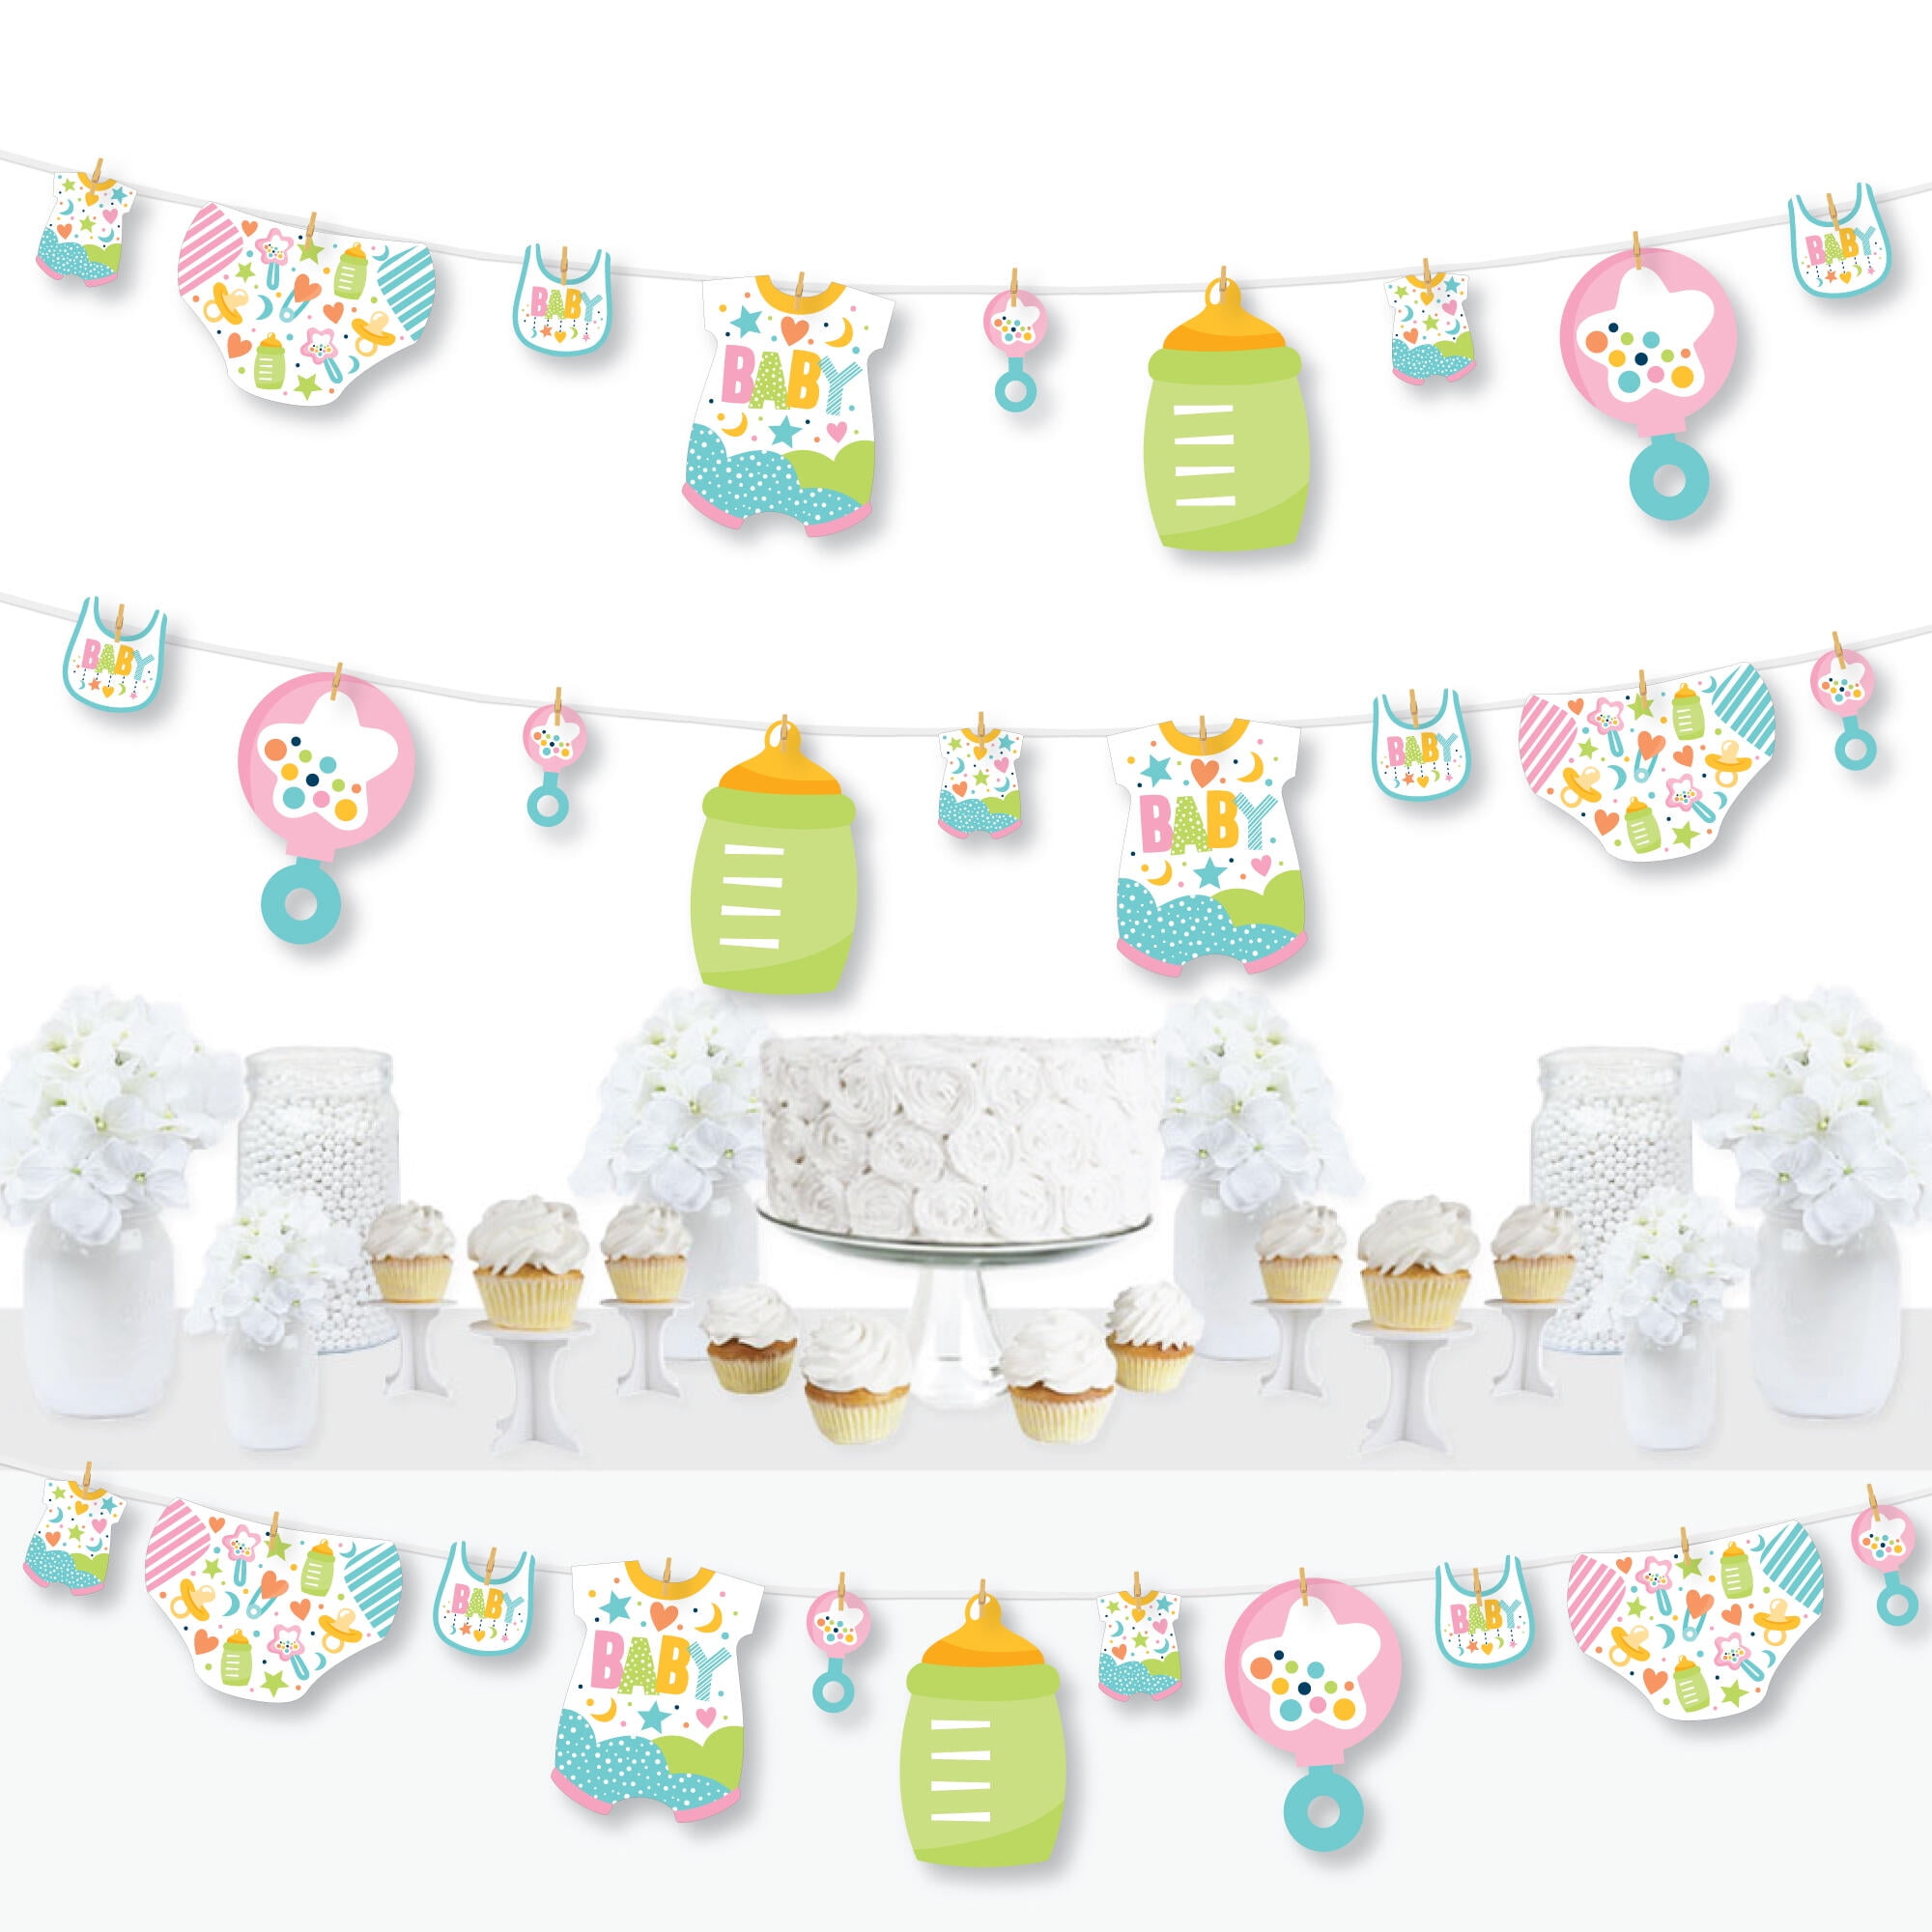 Chugging All Aboard 1st Birthday Party Jumbo Letter Banner Kit Paper 65 x 20 Multi 2-Piece